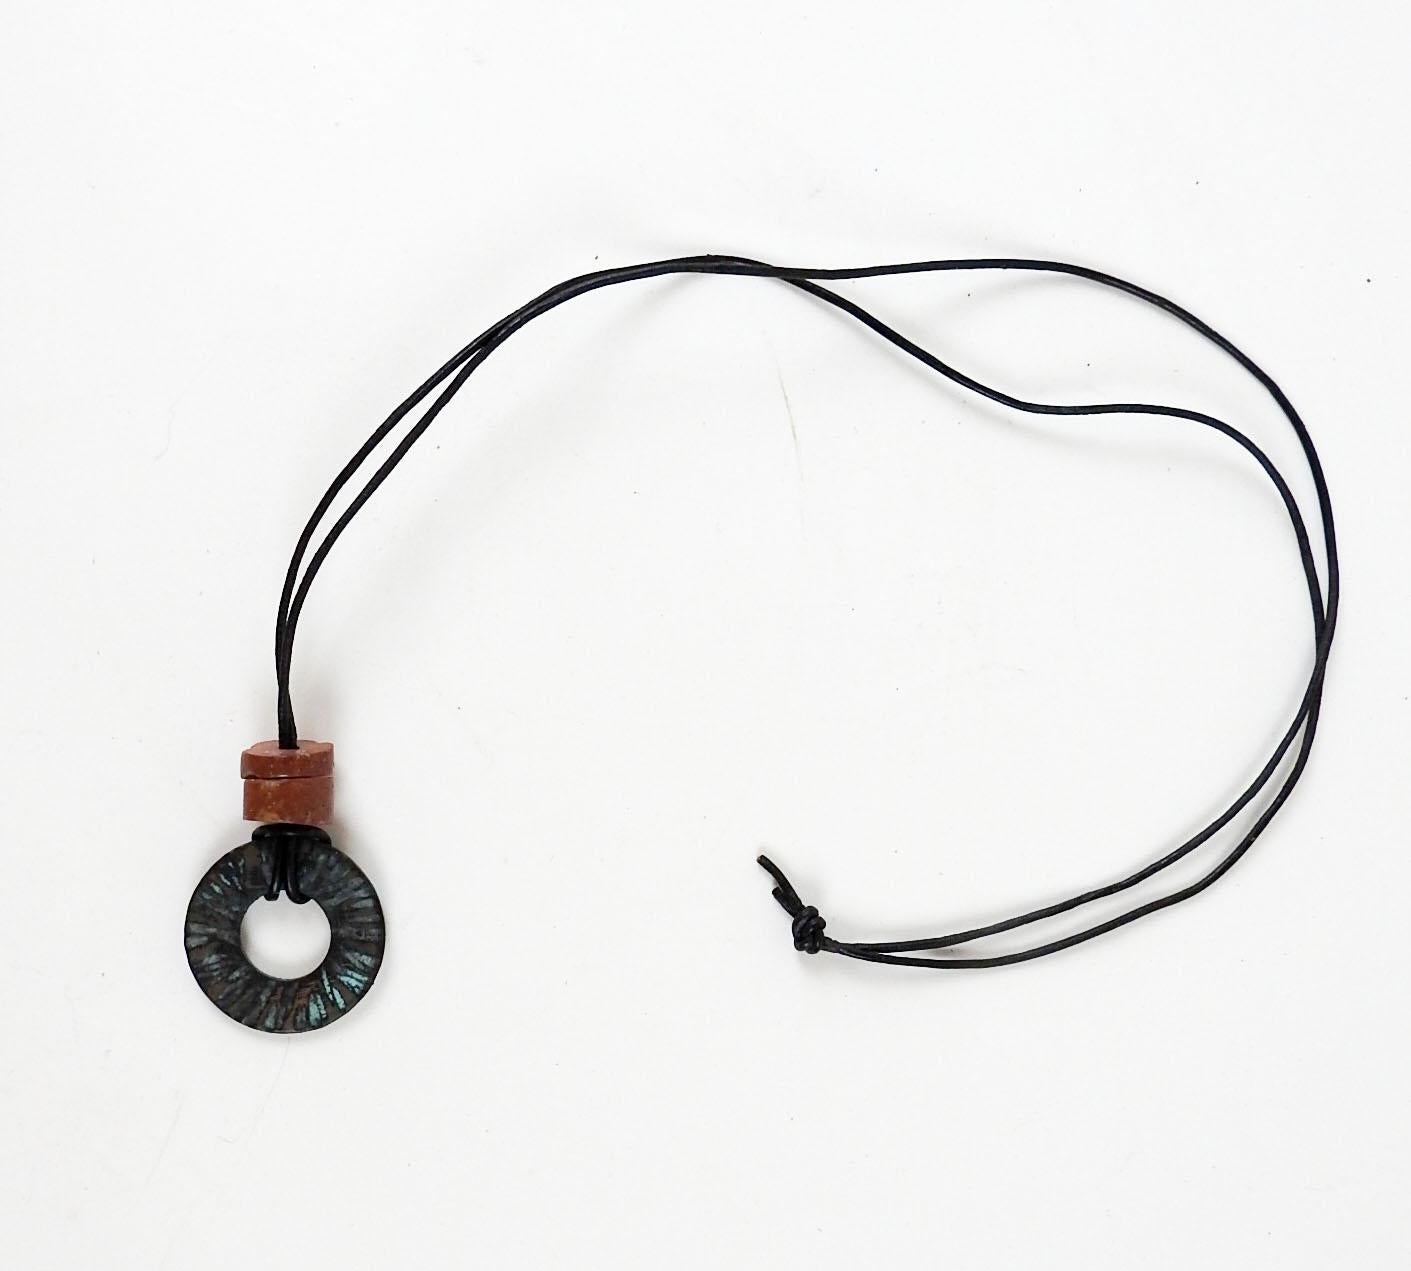 Circa 1990's hammered patinated bronze circle with bauxite bead accent. On thin round black leather cord, pendent is 1.25